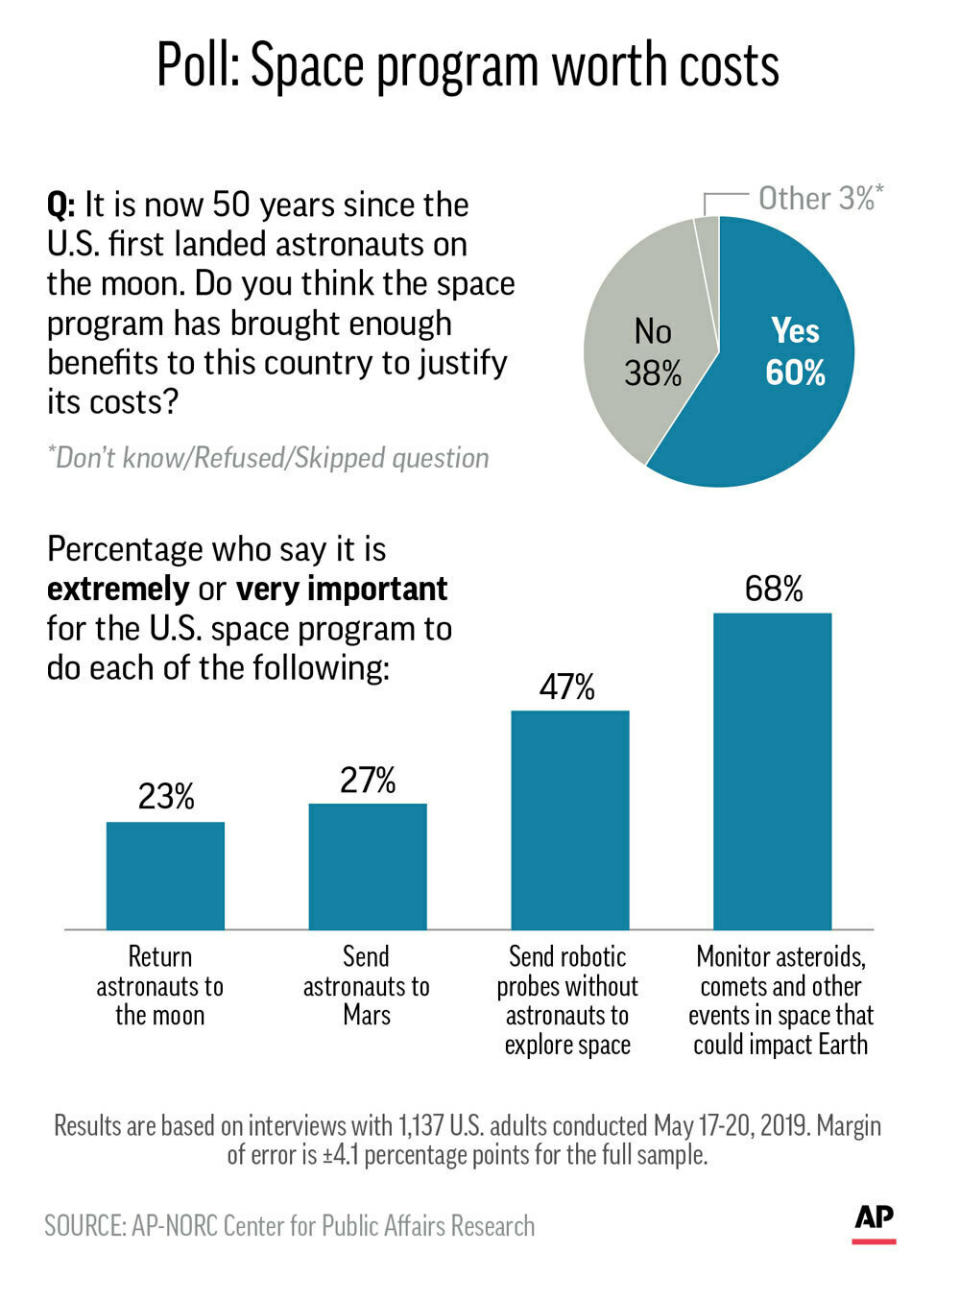 Graphic shows results of AP-NORC Center poll on U.S. attitudes toward the space program;